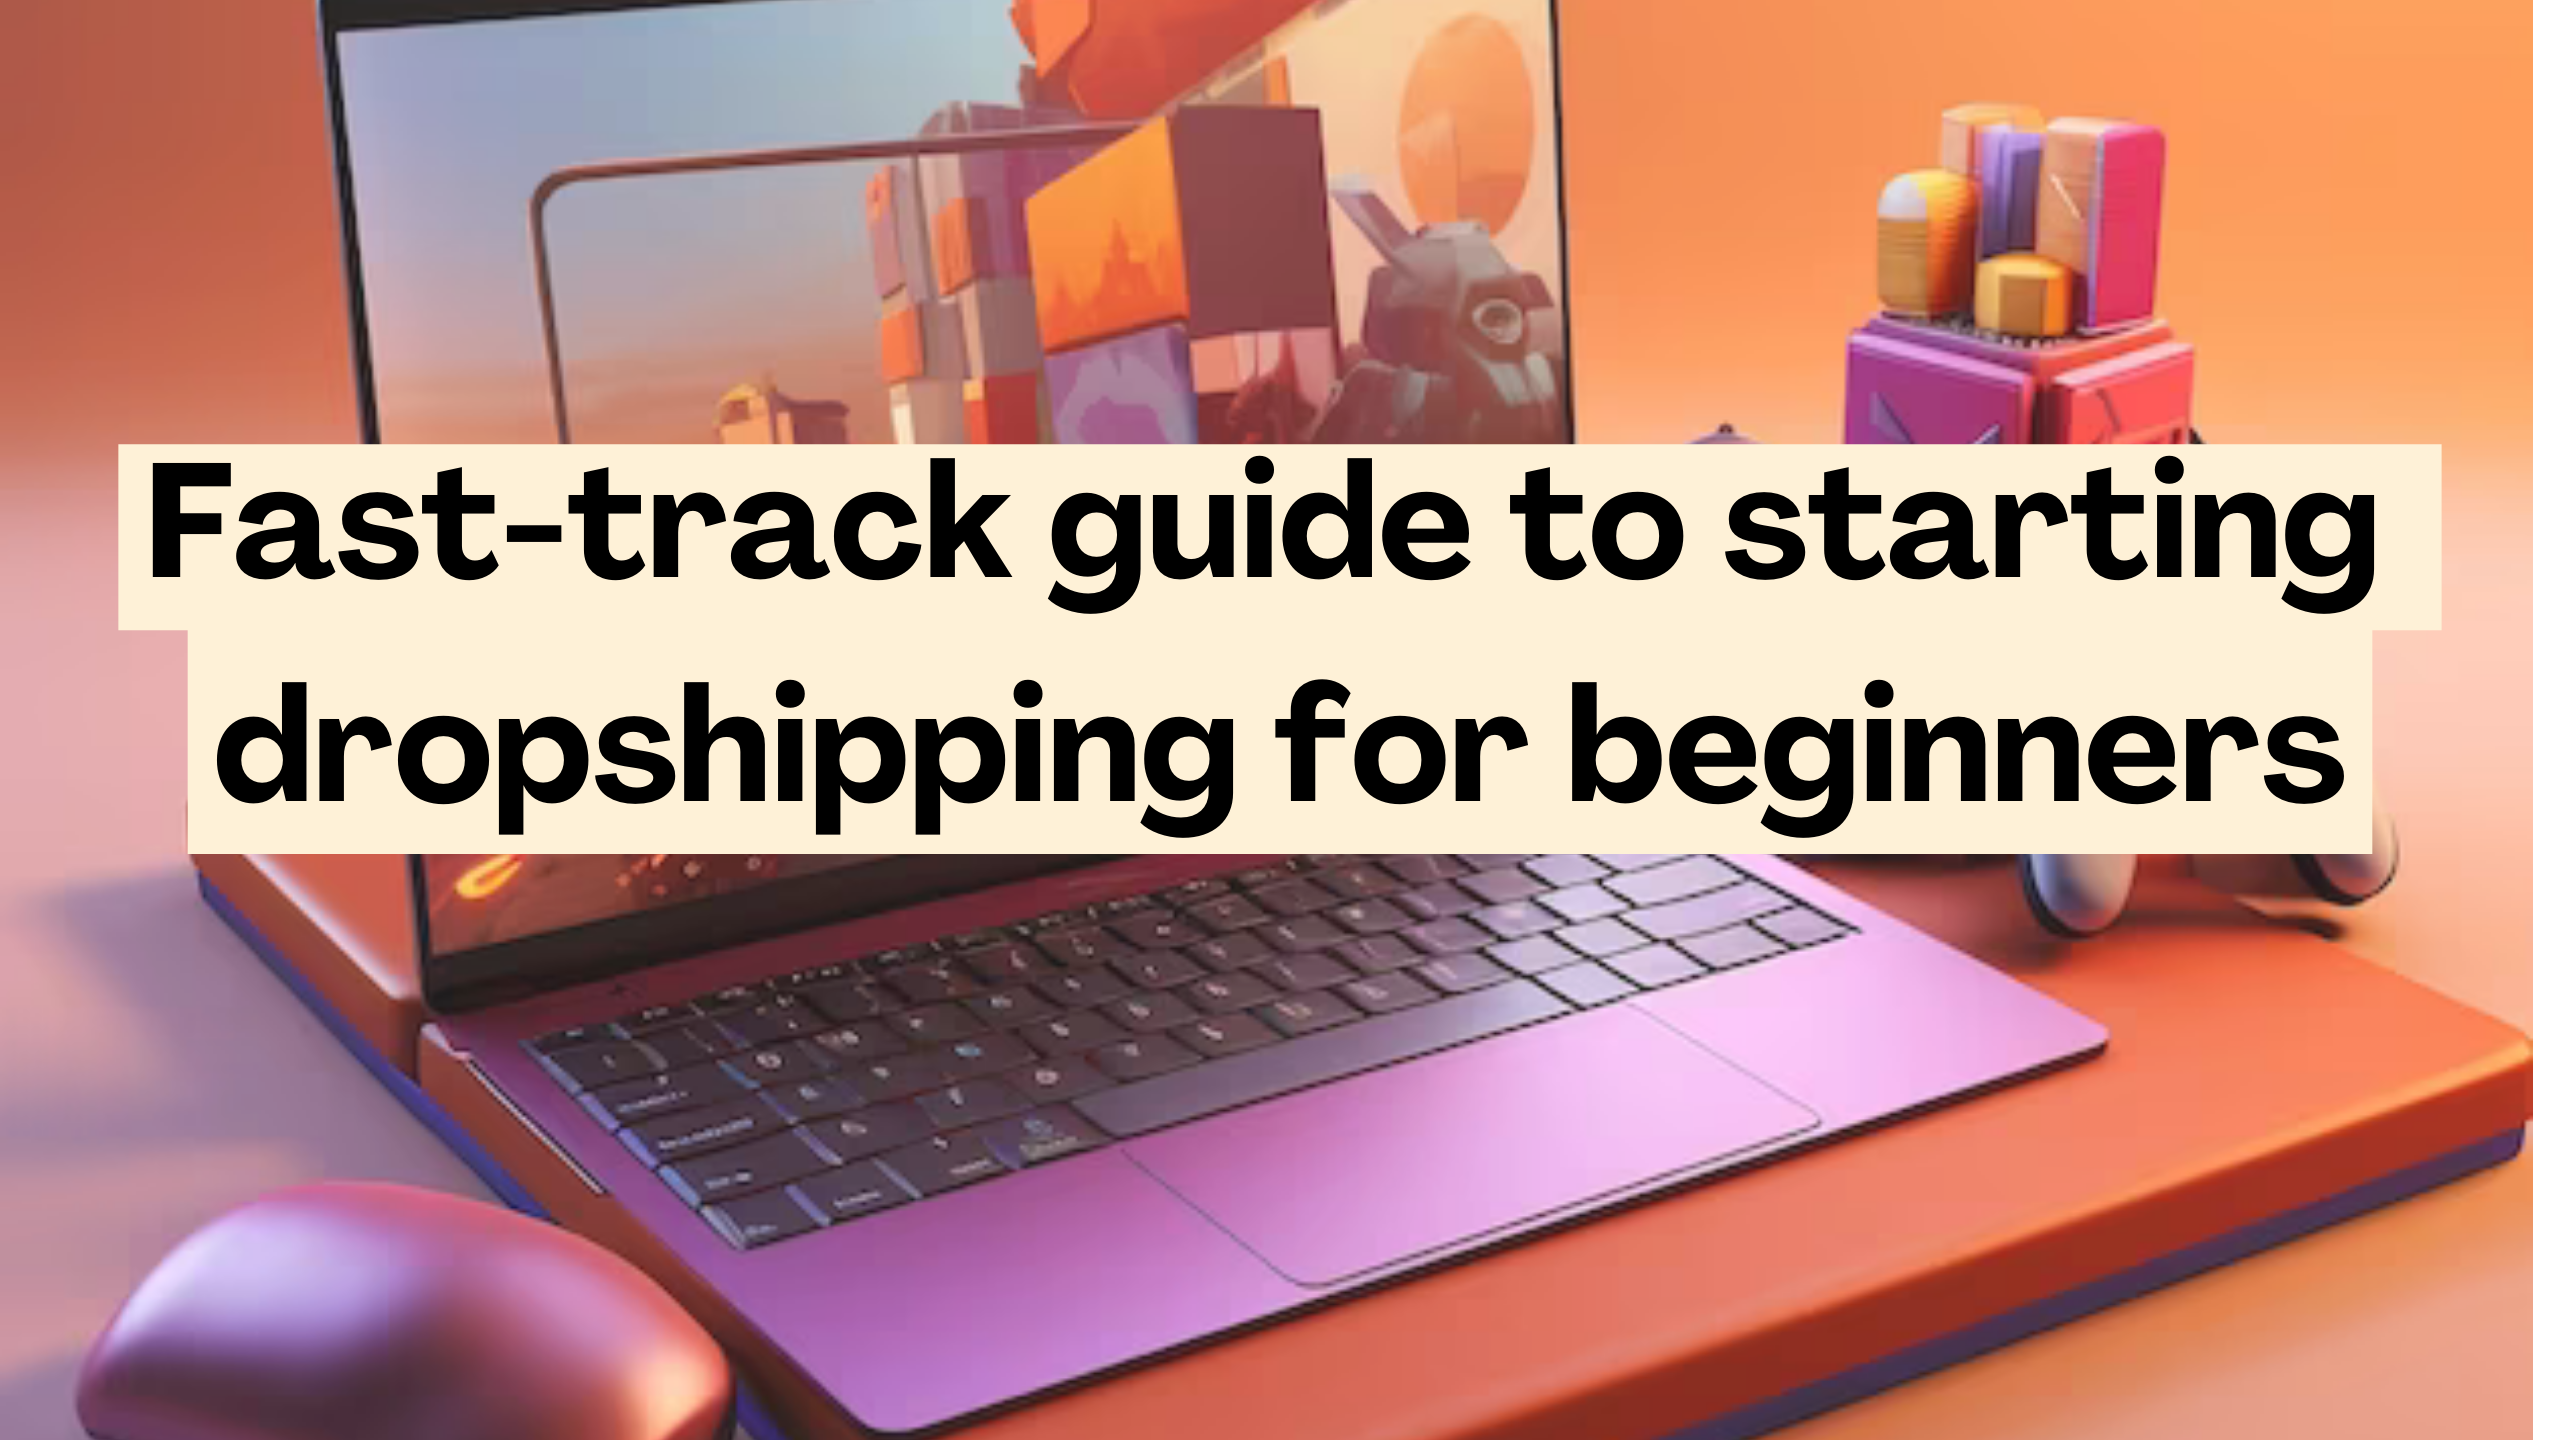 Fast-track guide to starting dropshipping for beginners